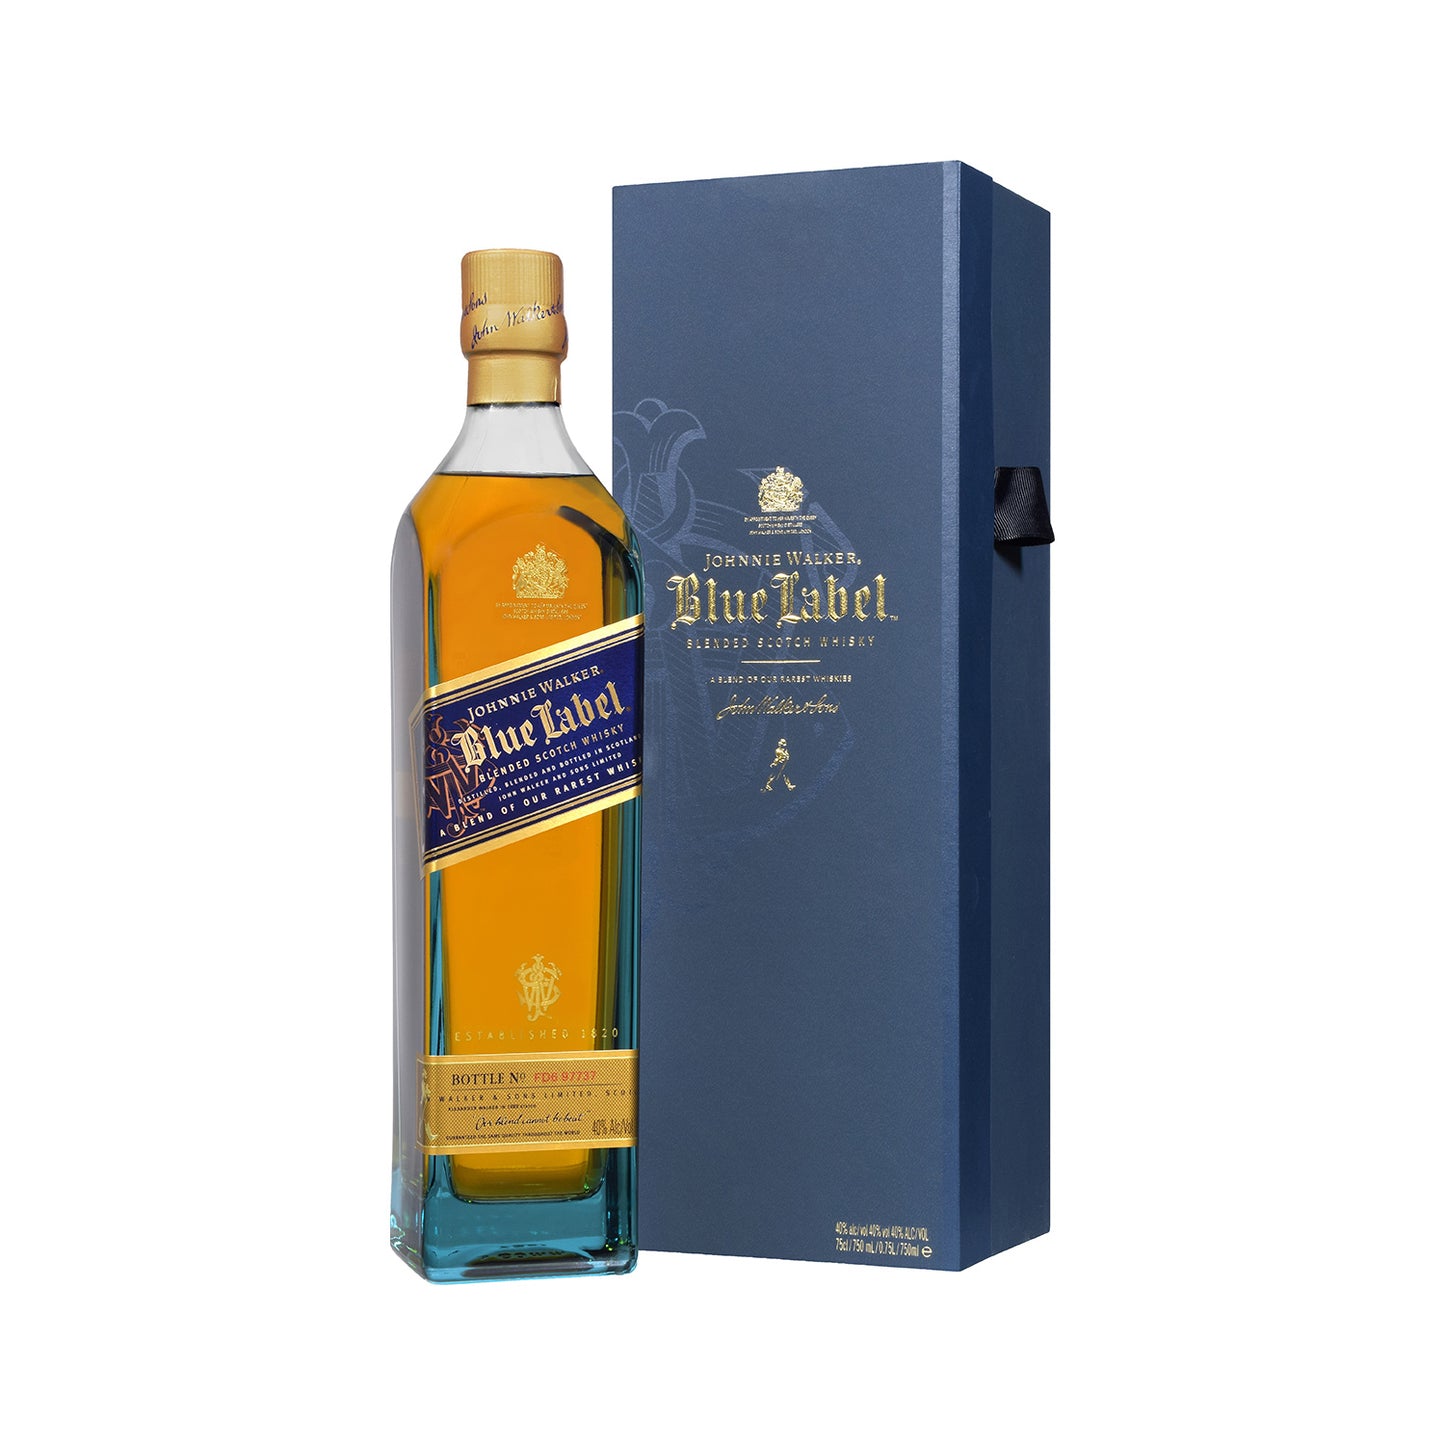 Johnnie Walker Blue Label with Gift Box